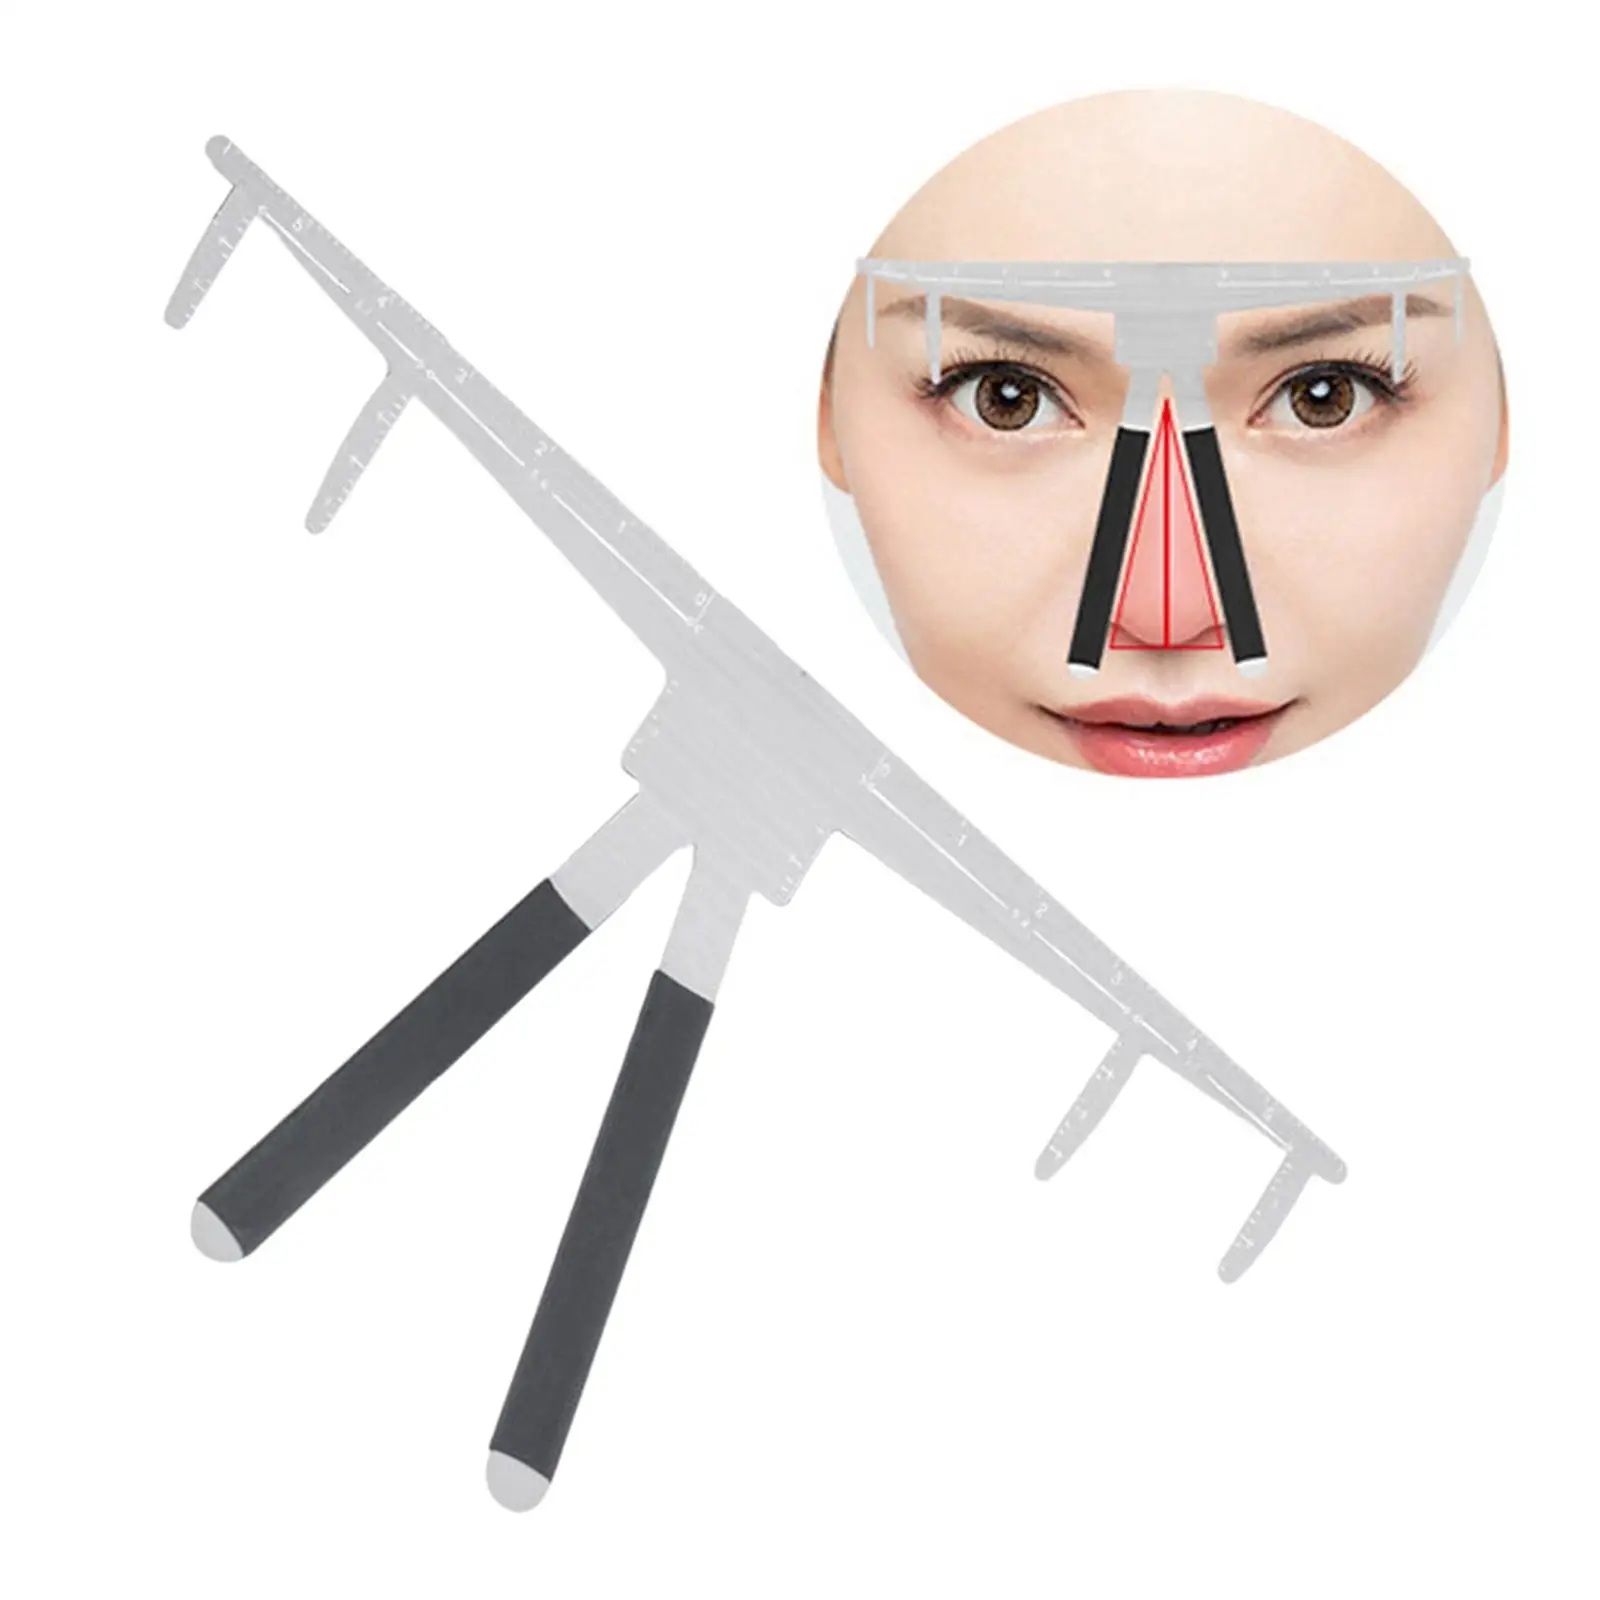 Eyebrow Ruler Three-Point Positioning Permanent Gold Ratio Corrector Shaper Makeup Stencil for Eyebrow Makeup Tattoo Supplies